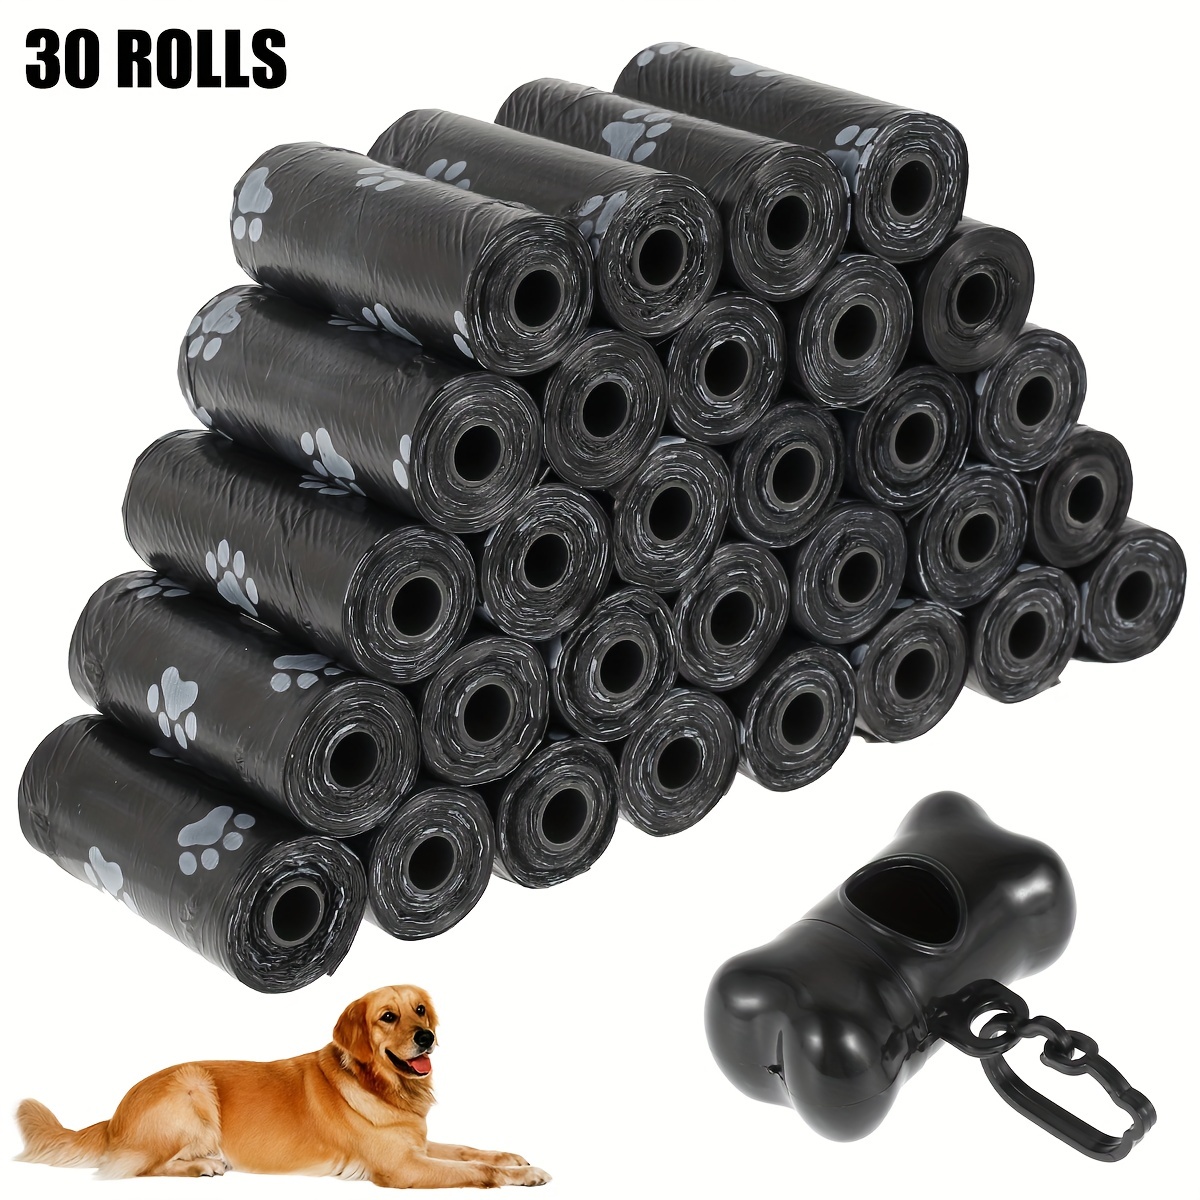 

30 Rolls Dog Poop Bags With 1pc Bone Shaped Dispenser, Durable Leak Proof Pet Waste Bags With Breakpoint Design, Pet Cleaning Supplies